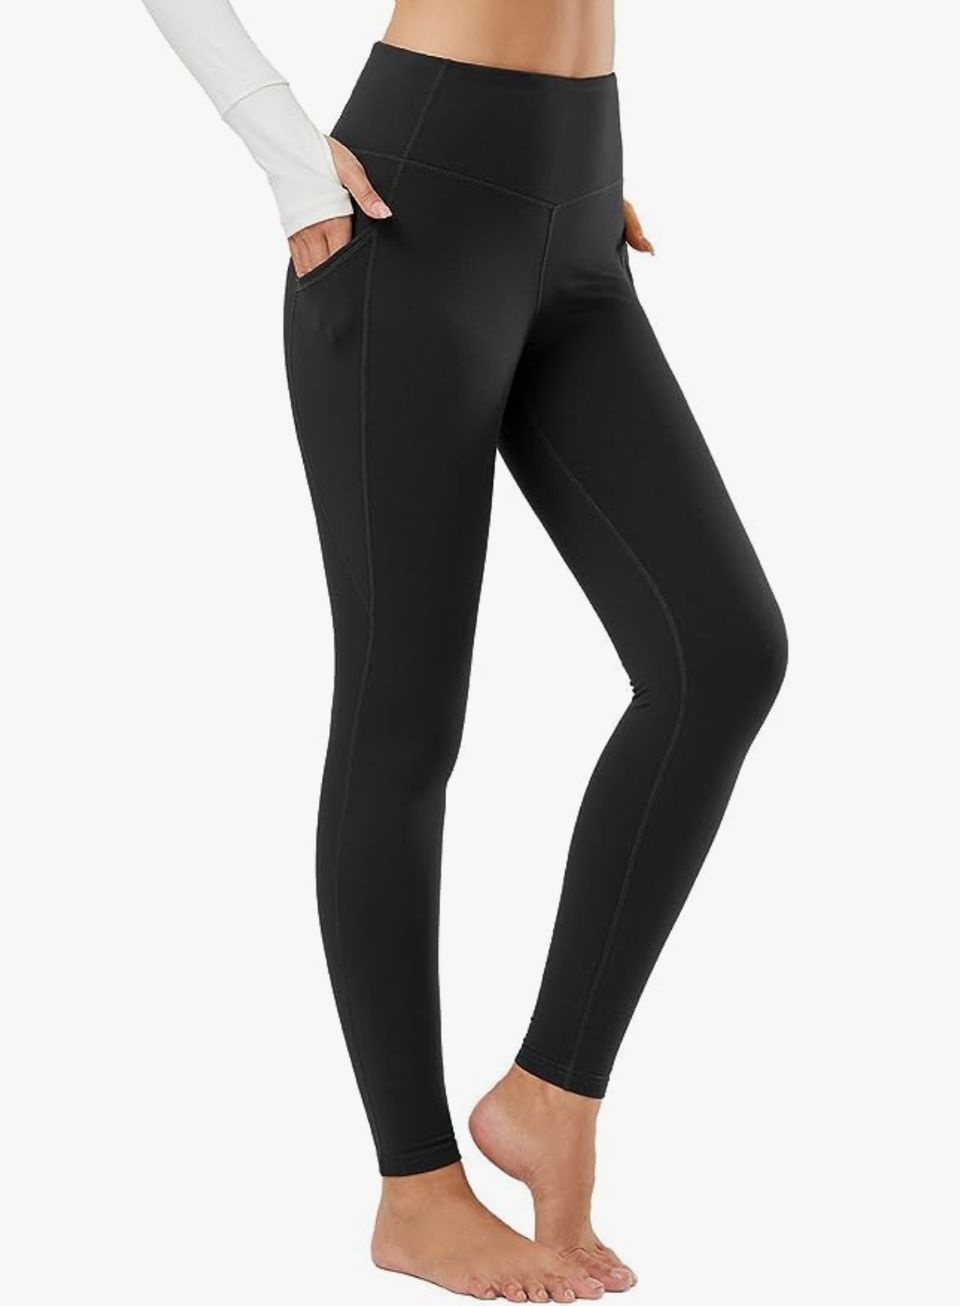 These 'Warm' Faux-Leather Leggings Are 43% Off at  — Almost 10,000  5-Star Reviews